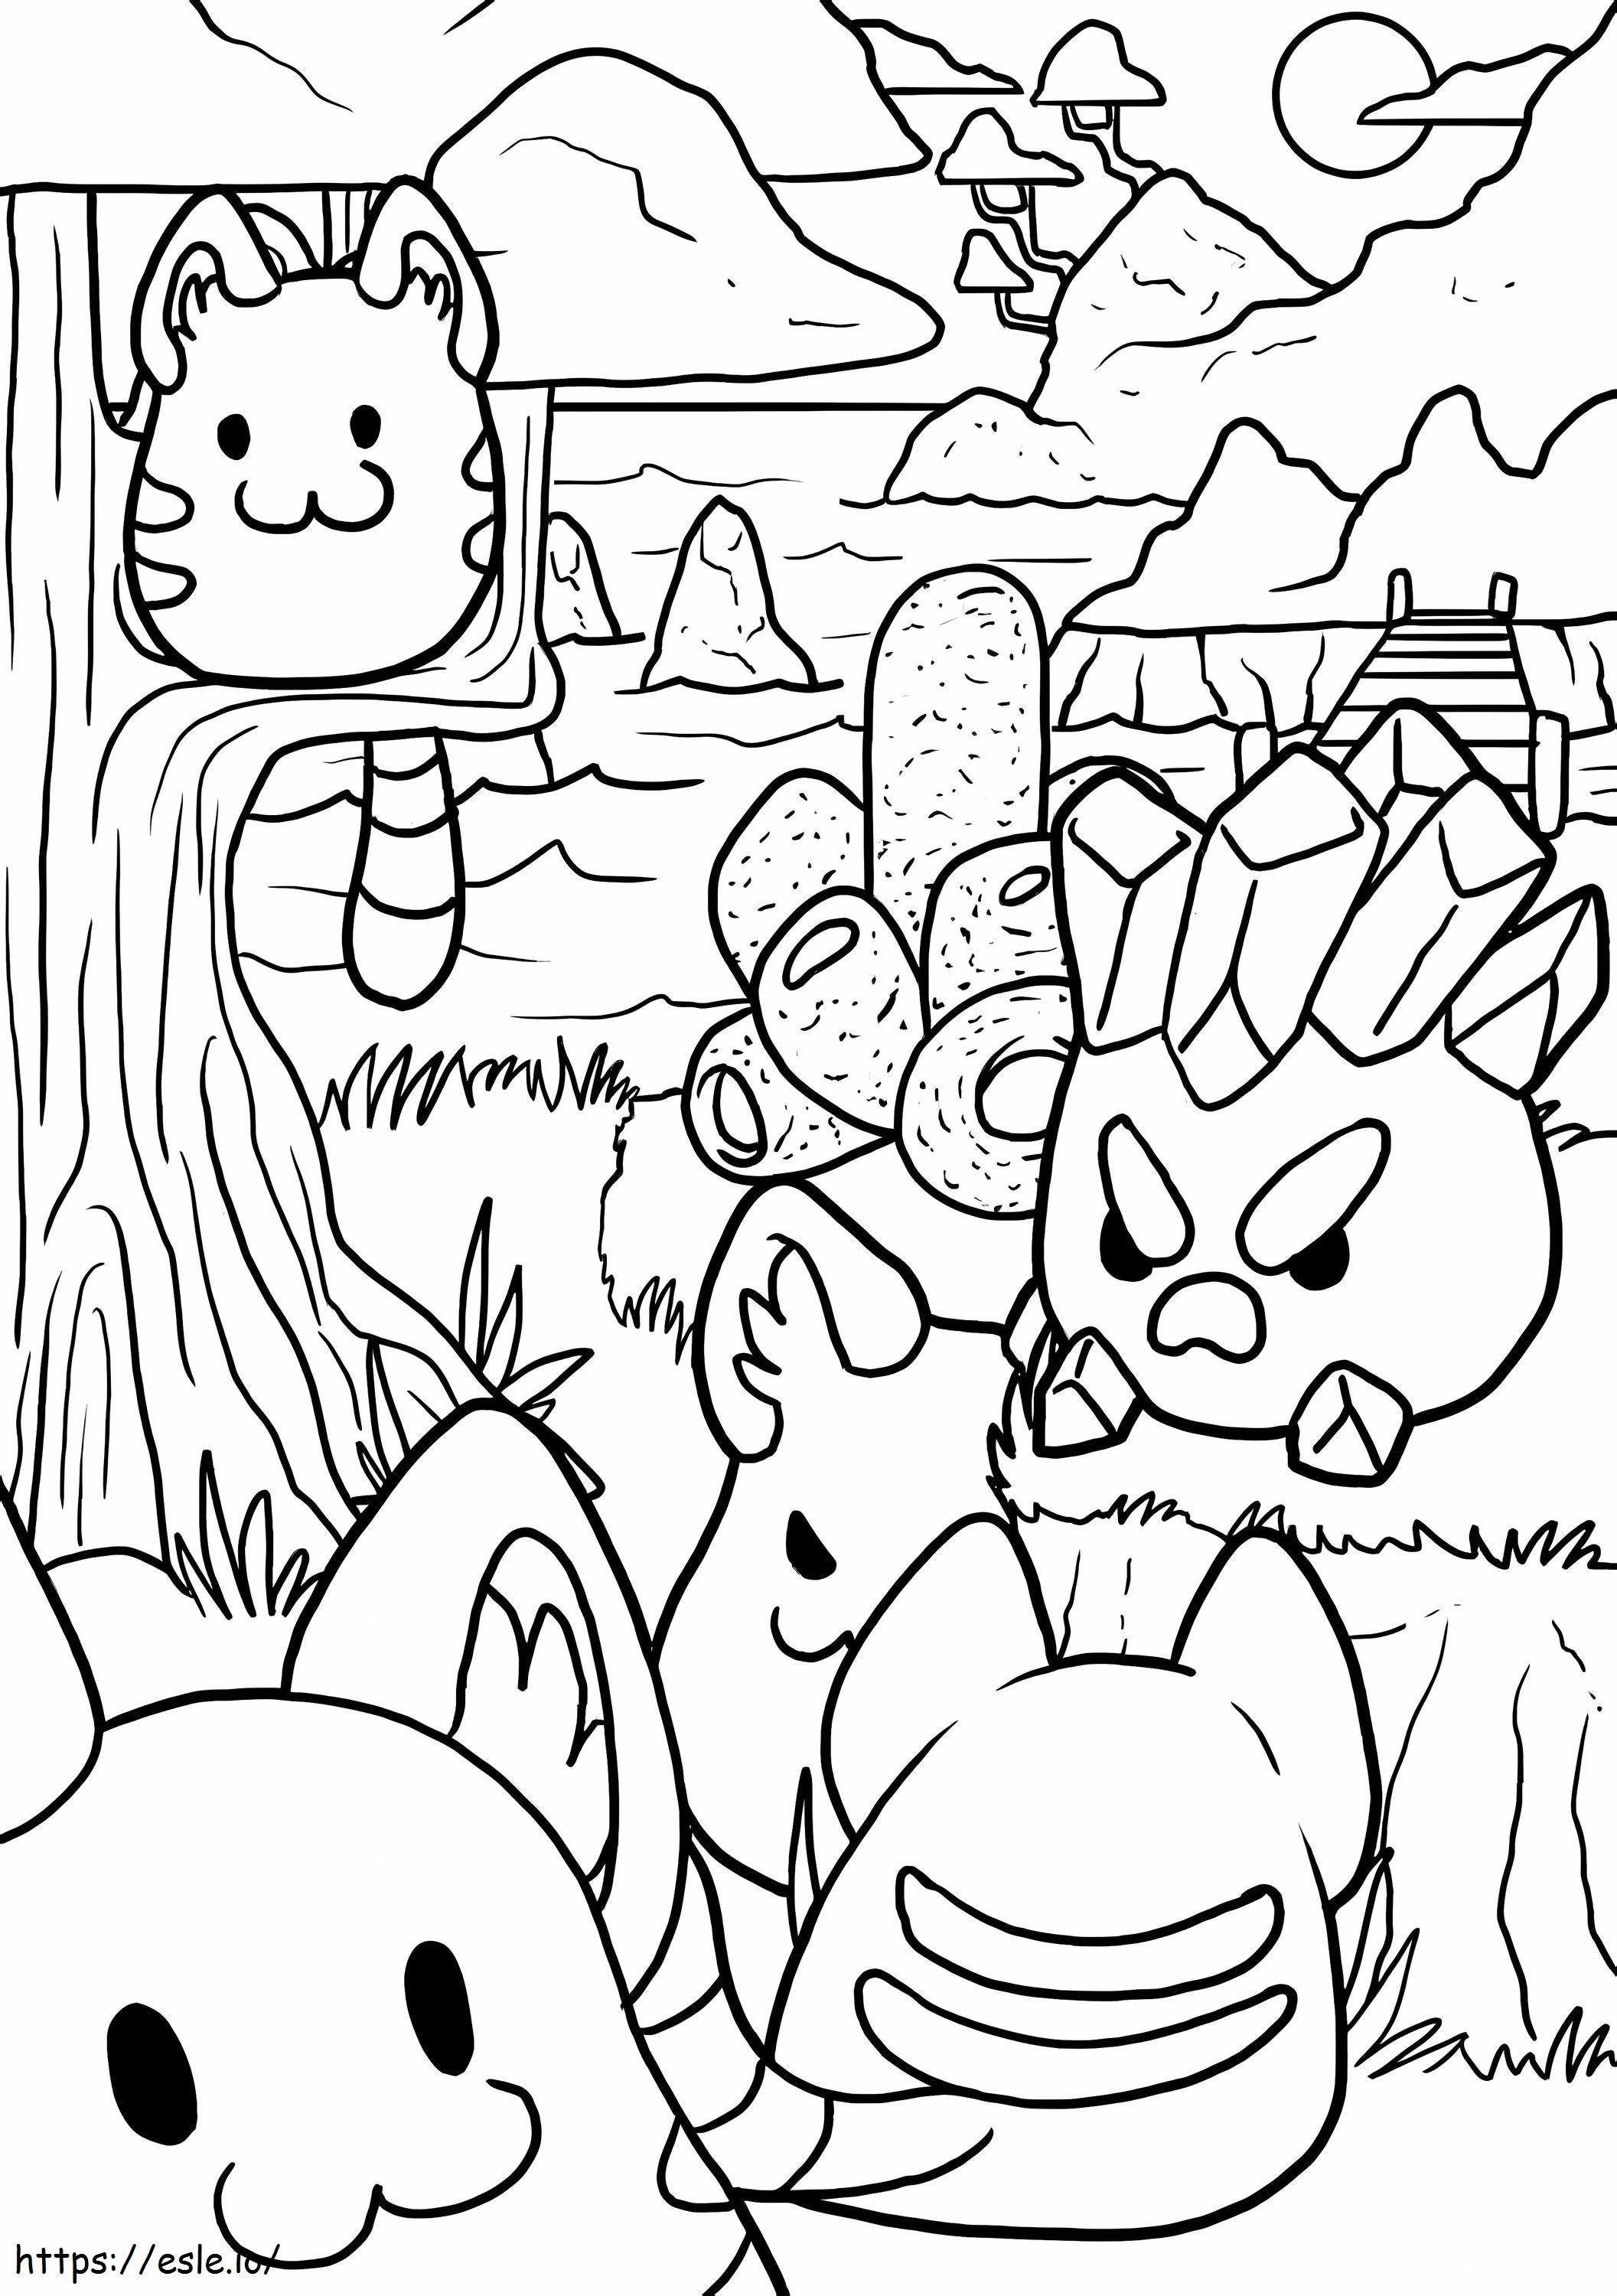 Slime Farm coloring page